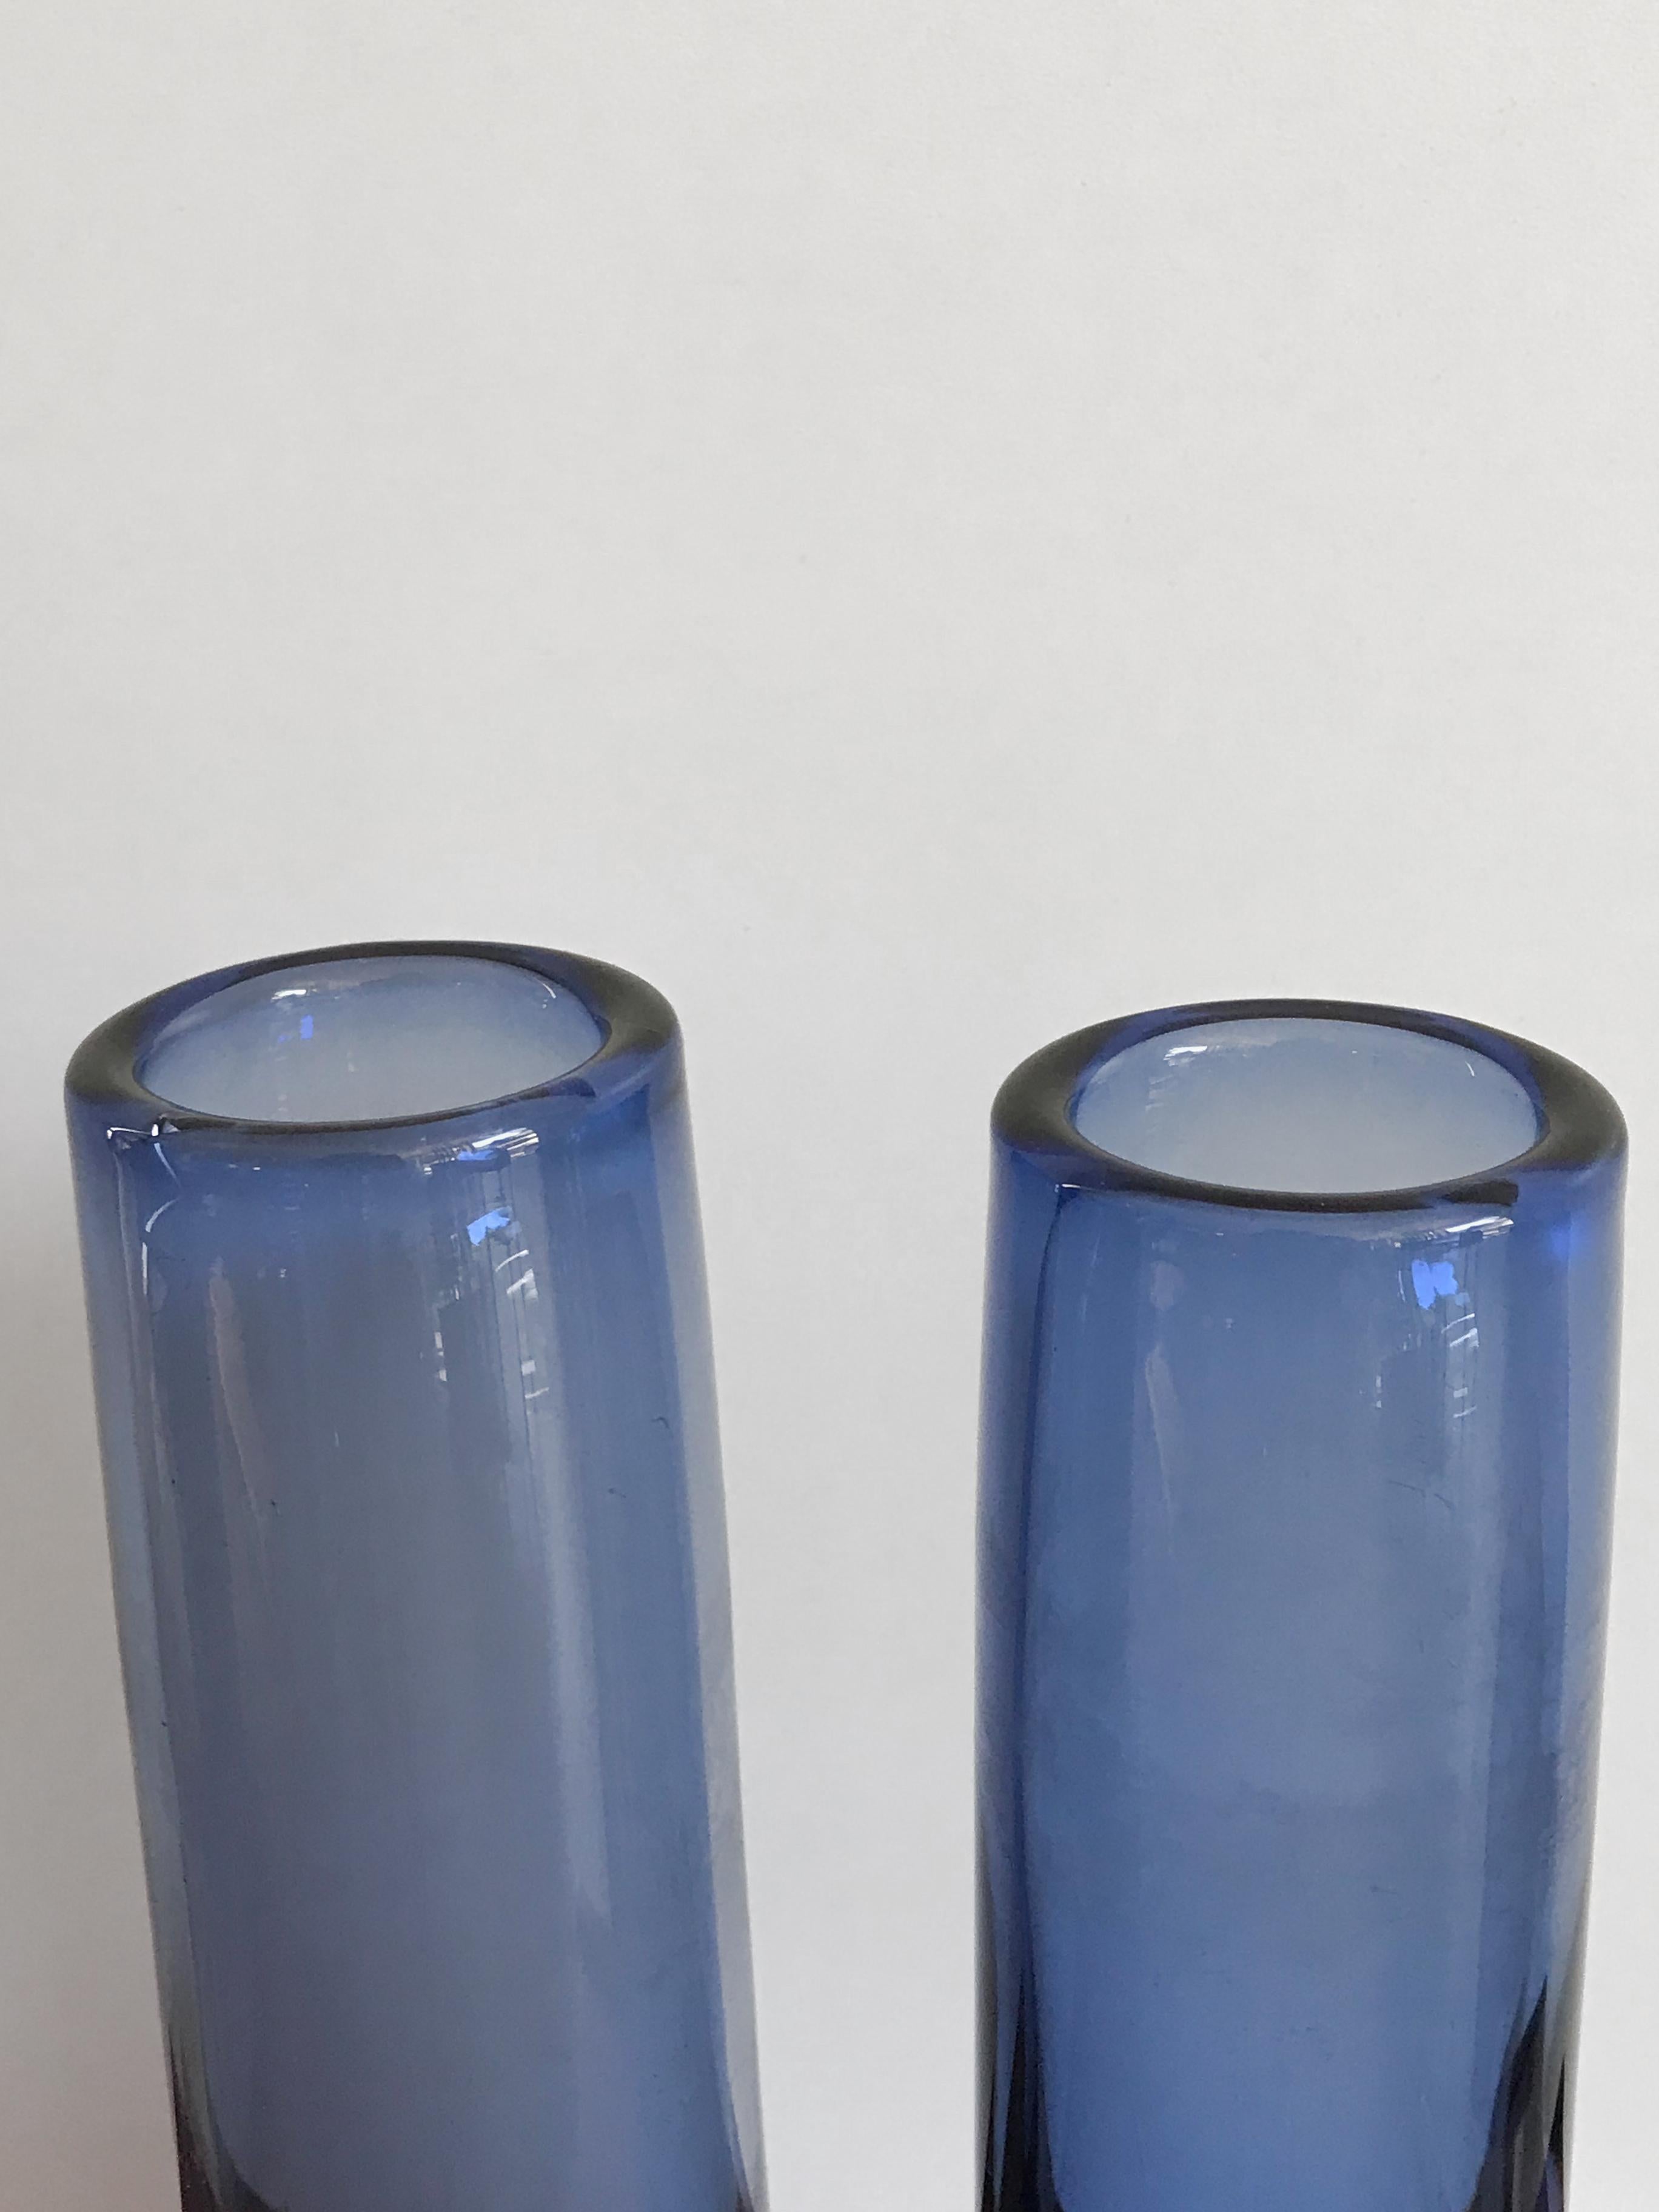 Scandinavian glass vases, set of two, designed by Per Lutken for Holmegaard with mark engraved on the bottom, some signs due to normal use over time, 1960s.